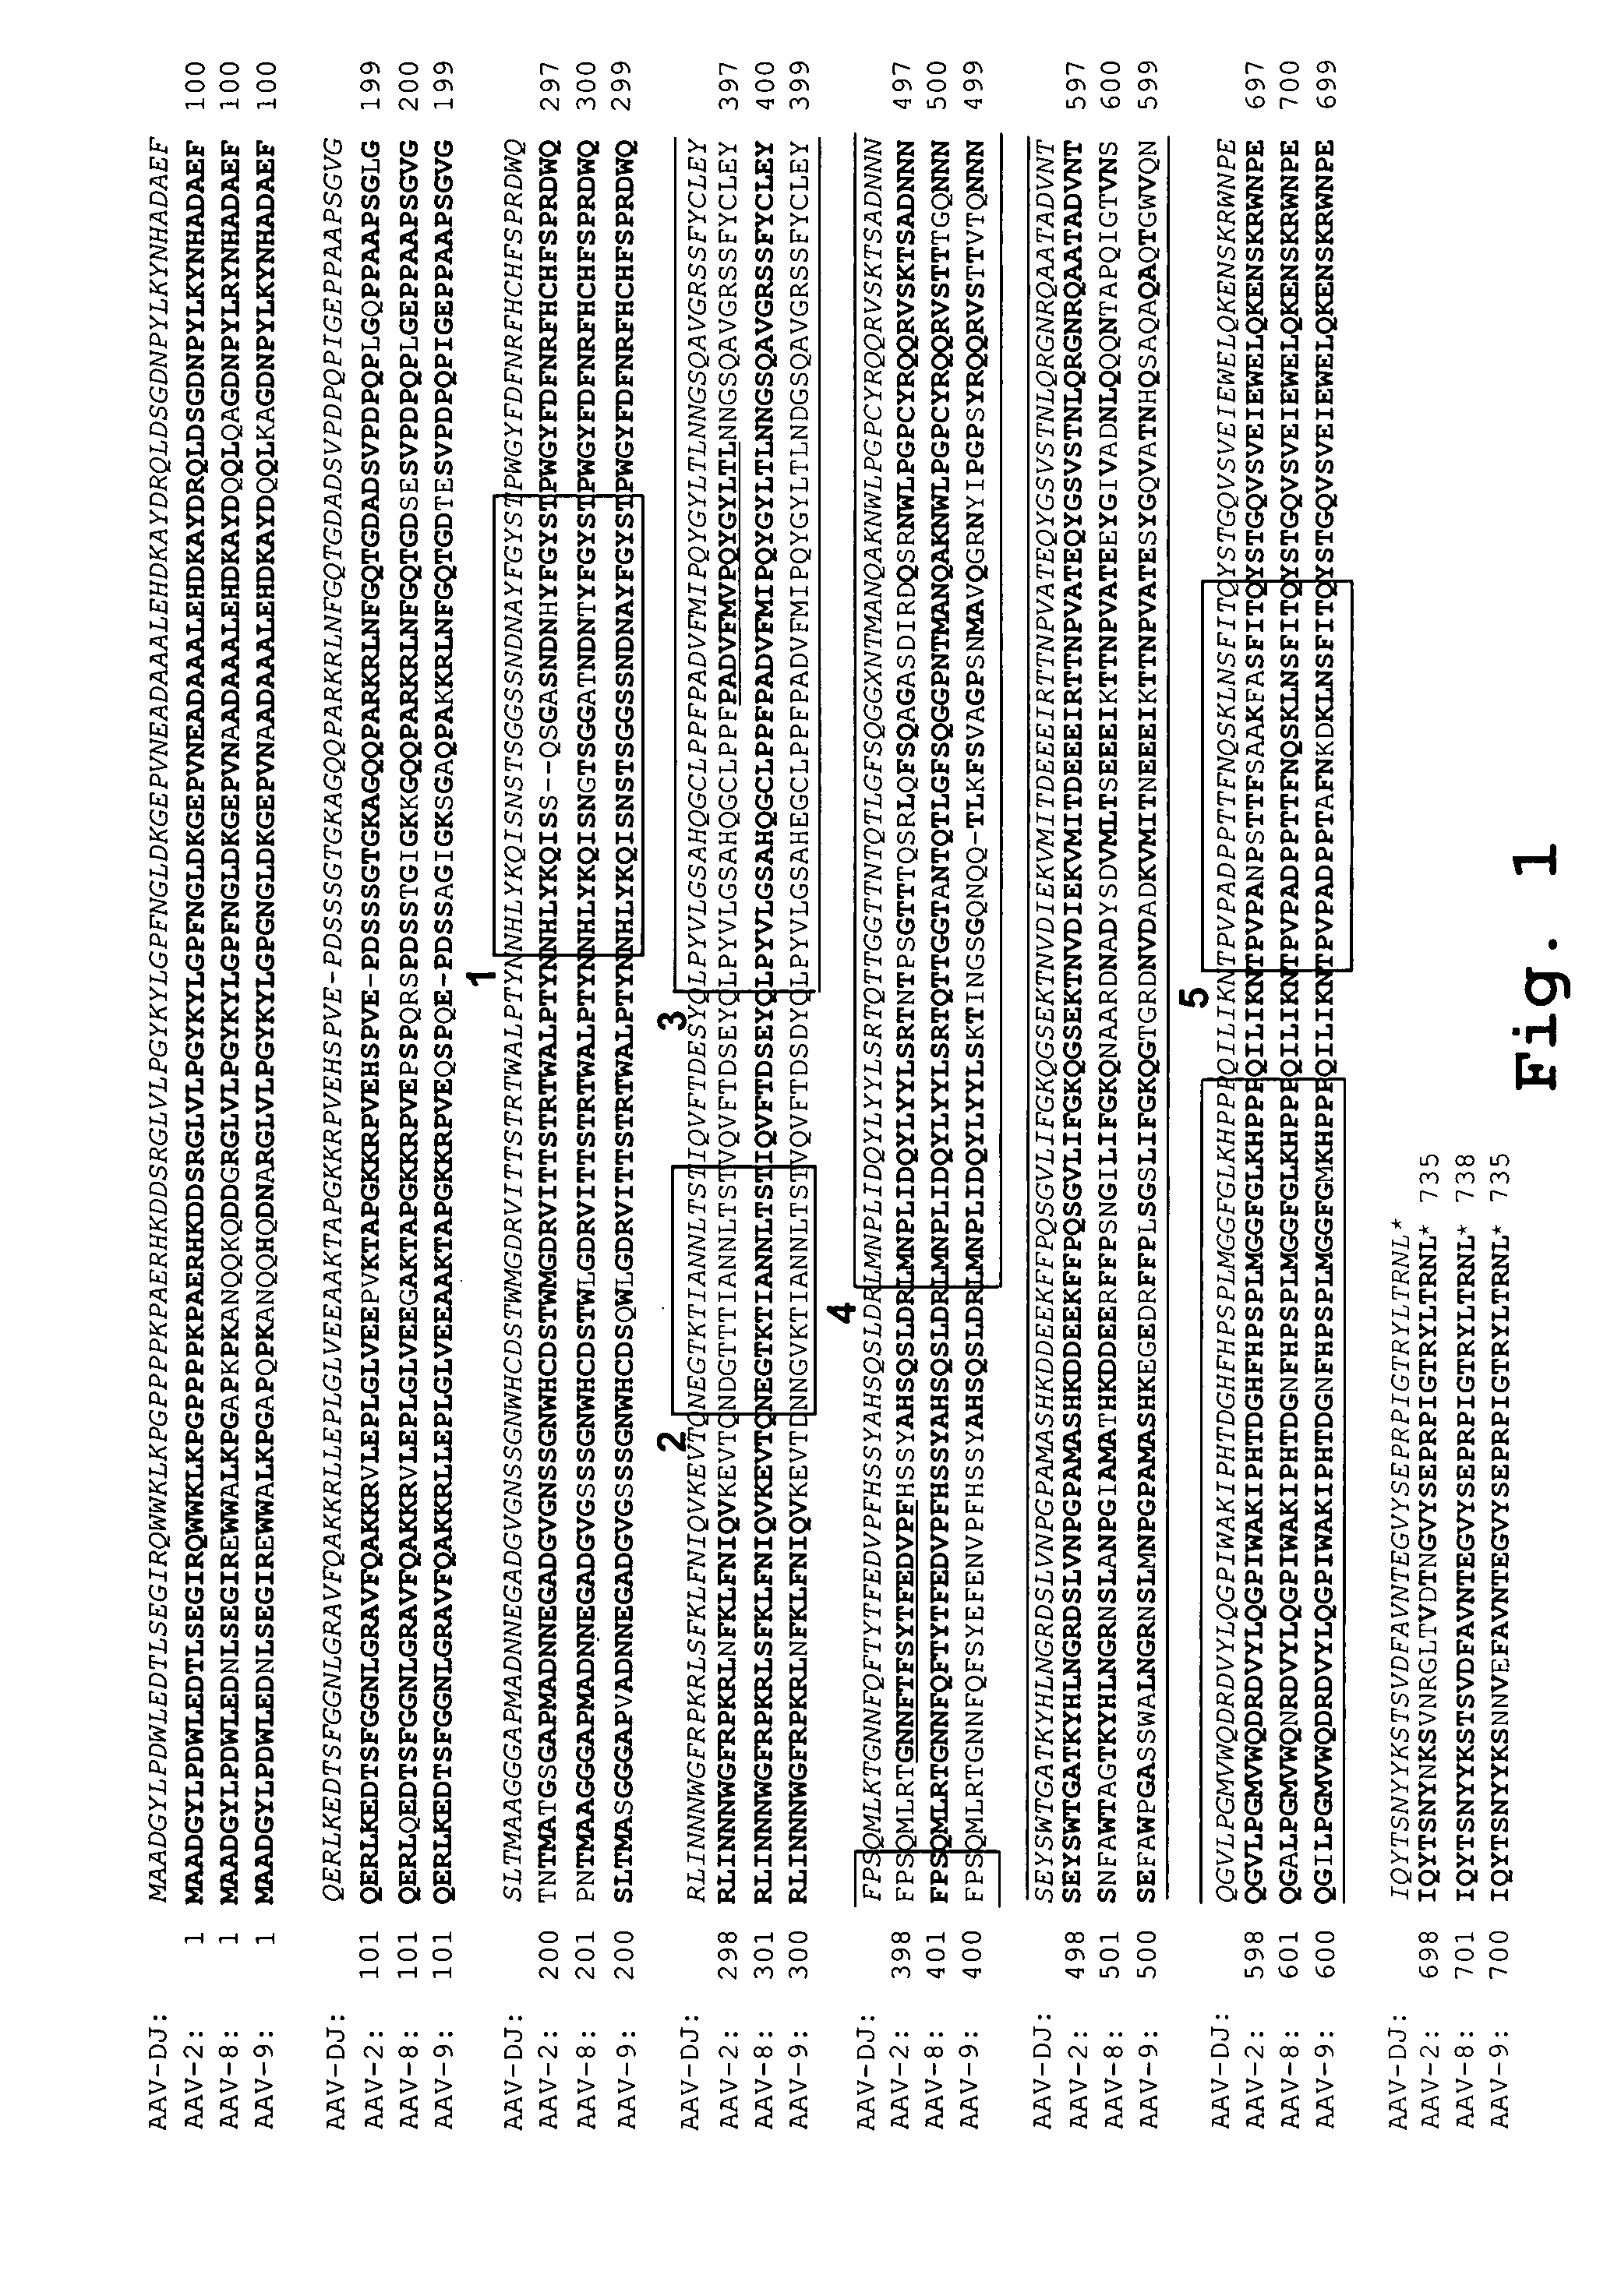 AAV capsid library and AAV capsid proteins